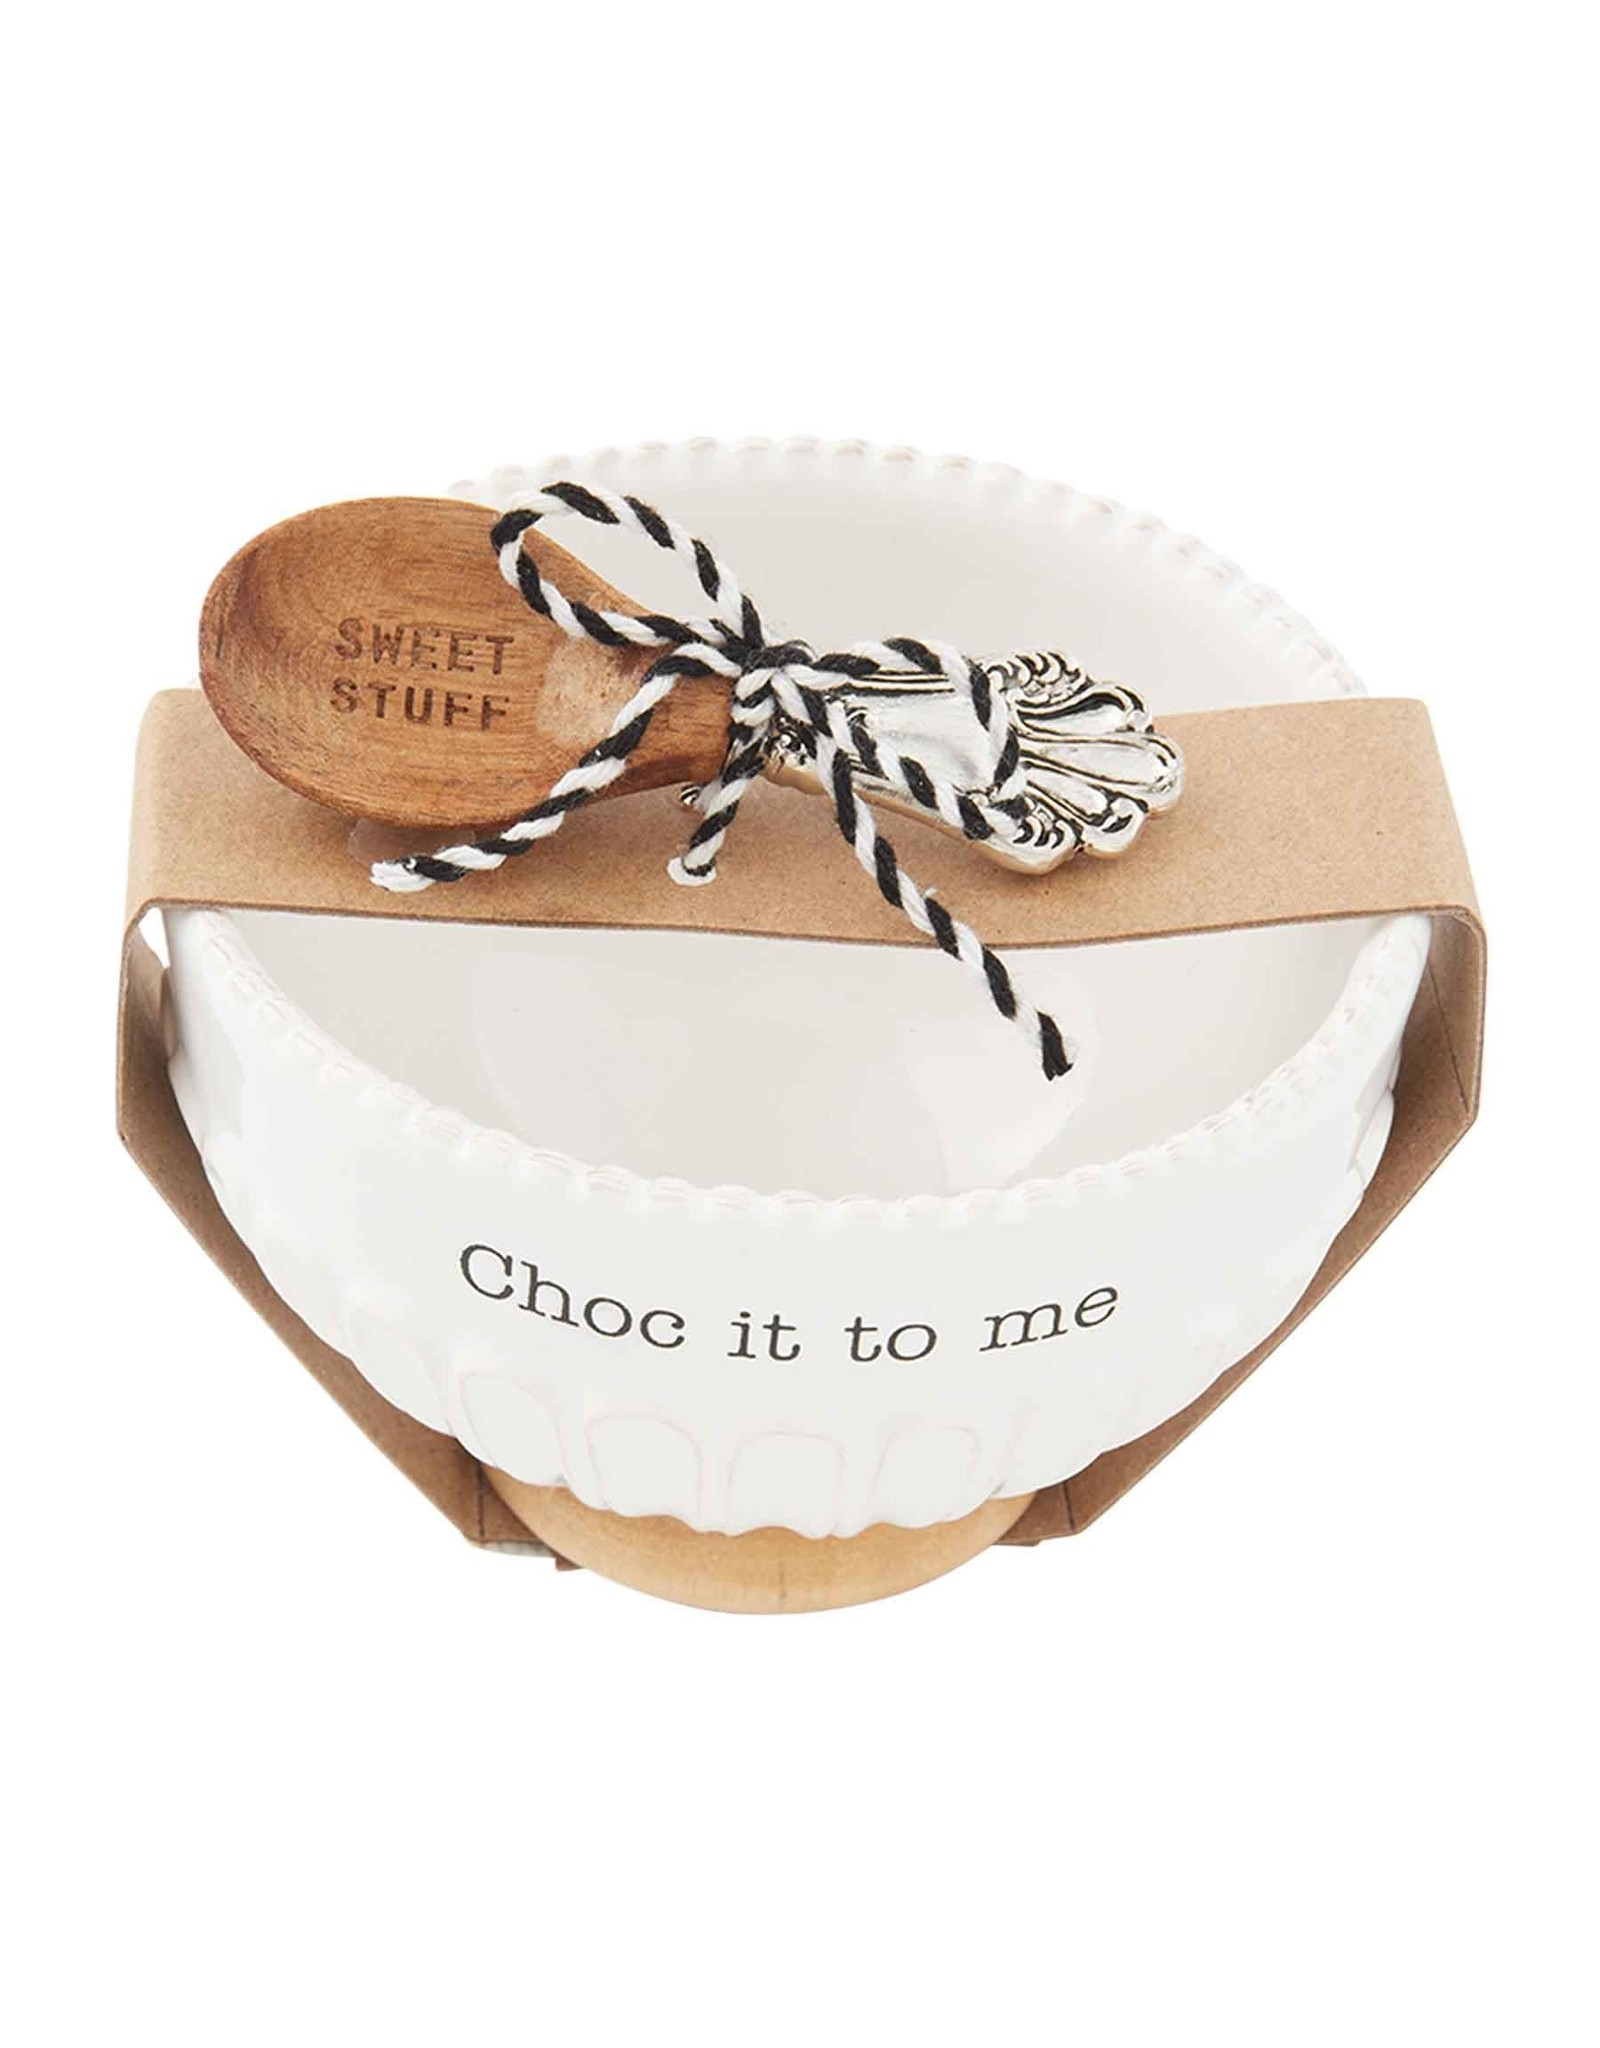 Mud Pie Choc It To Me Candy Dish Set With Sweet Stuff Spoon